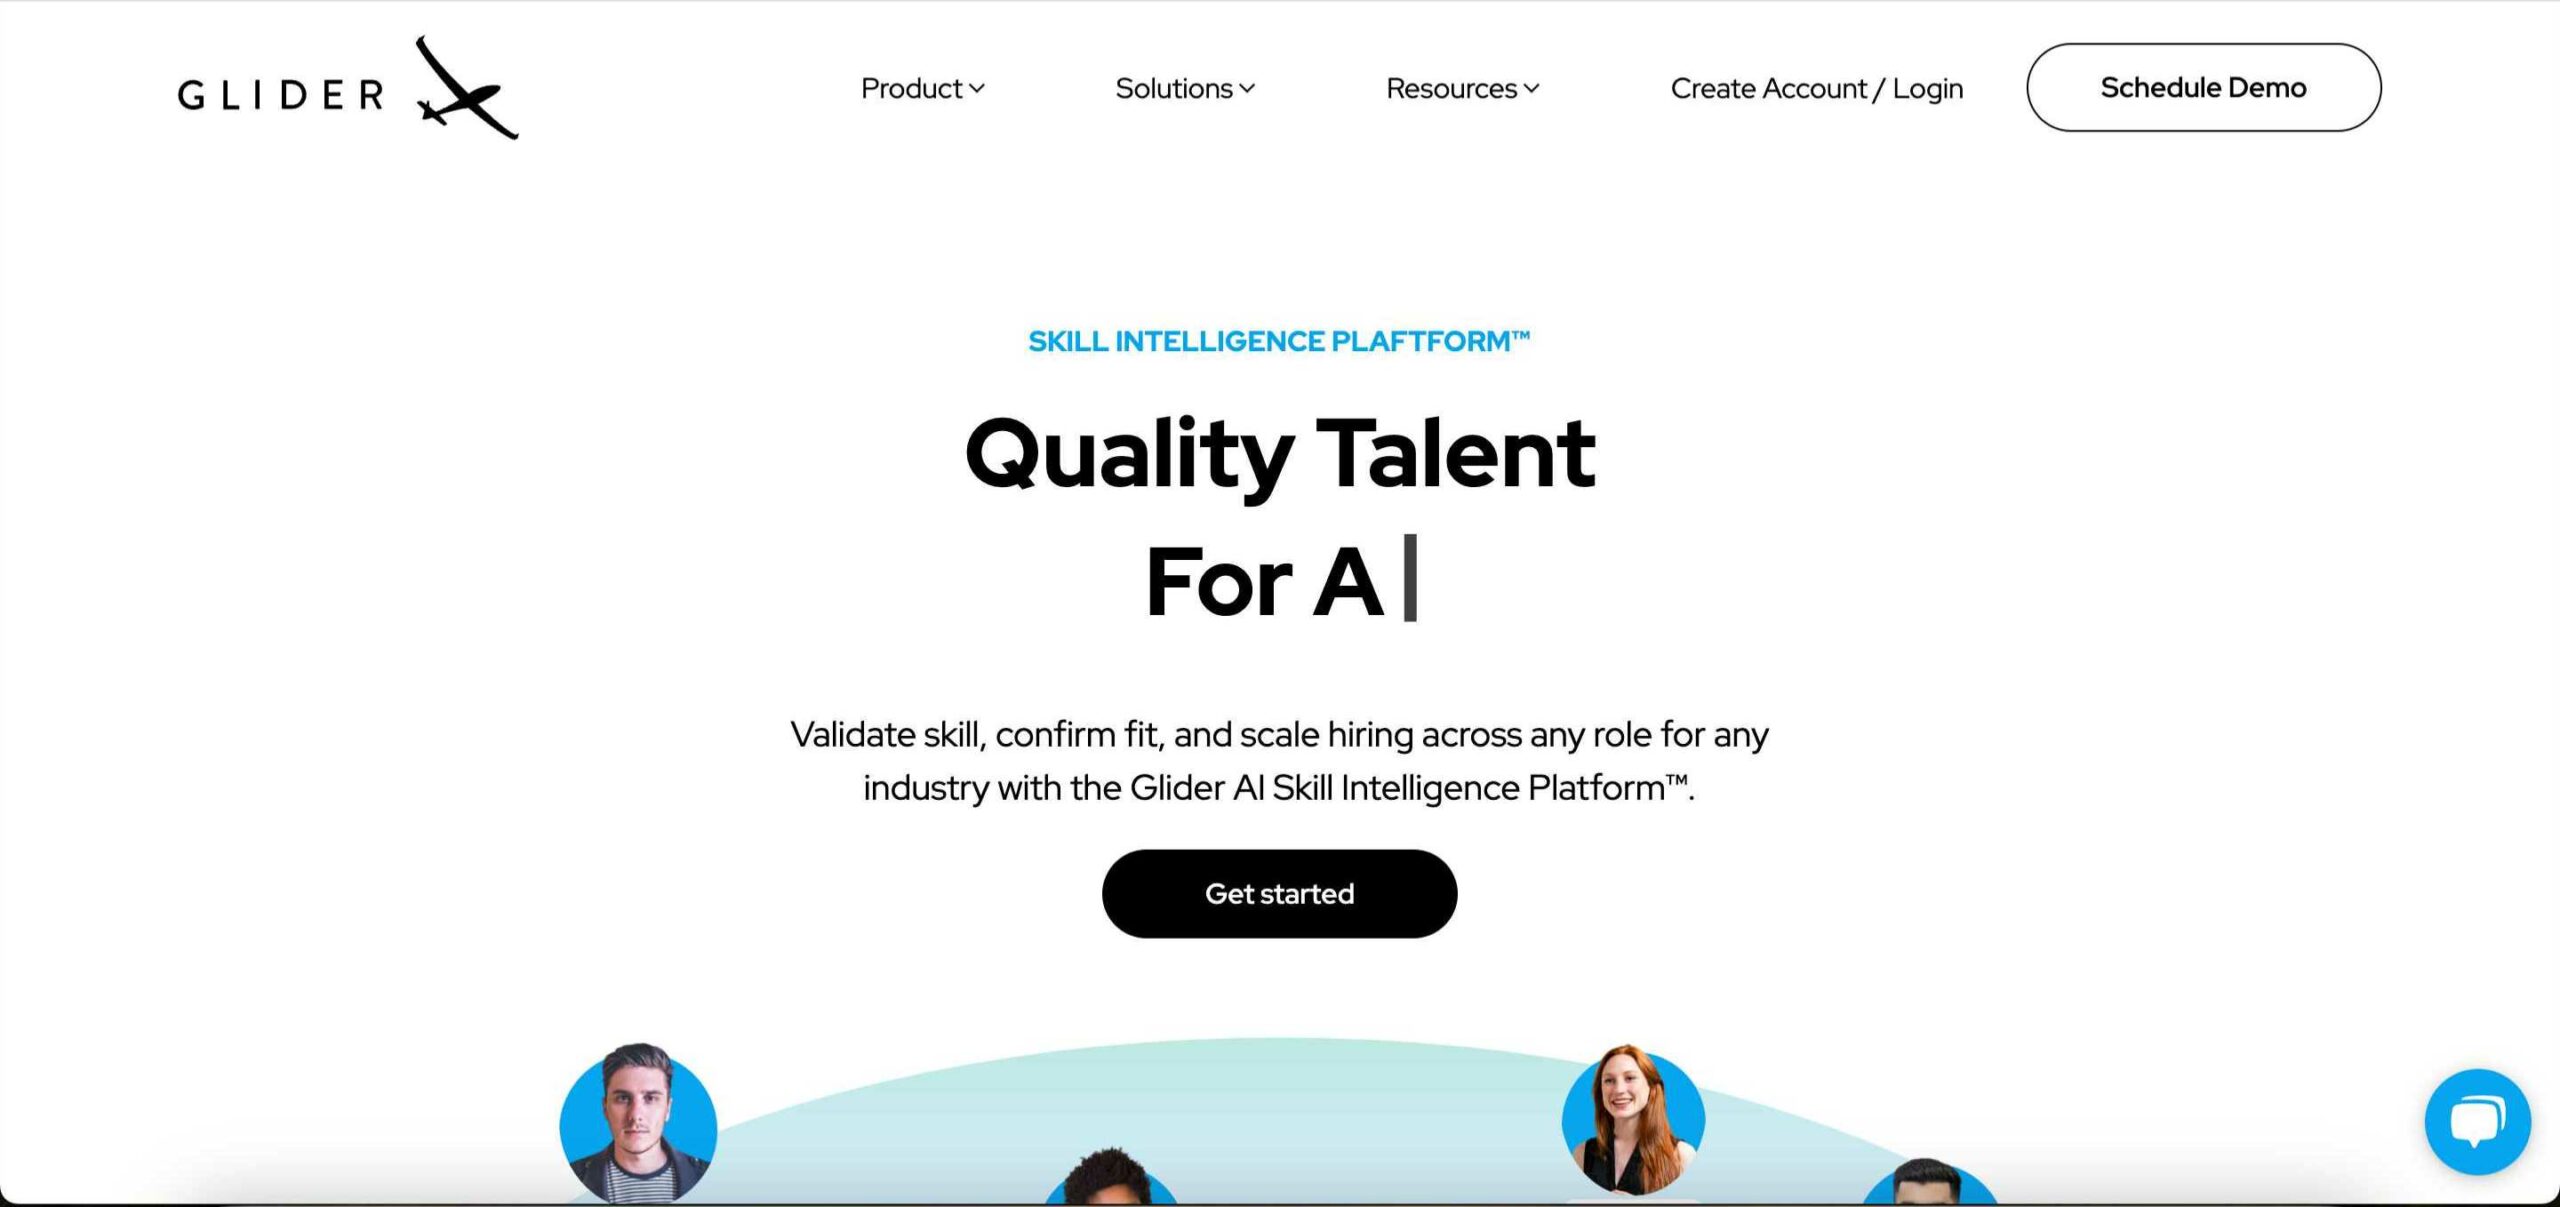 Glider AI uses AI to help automate a lot of the candidate assessment process.